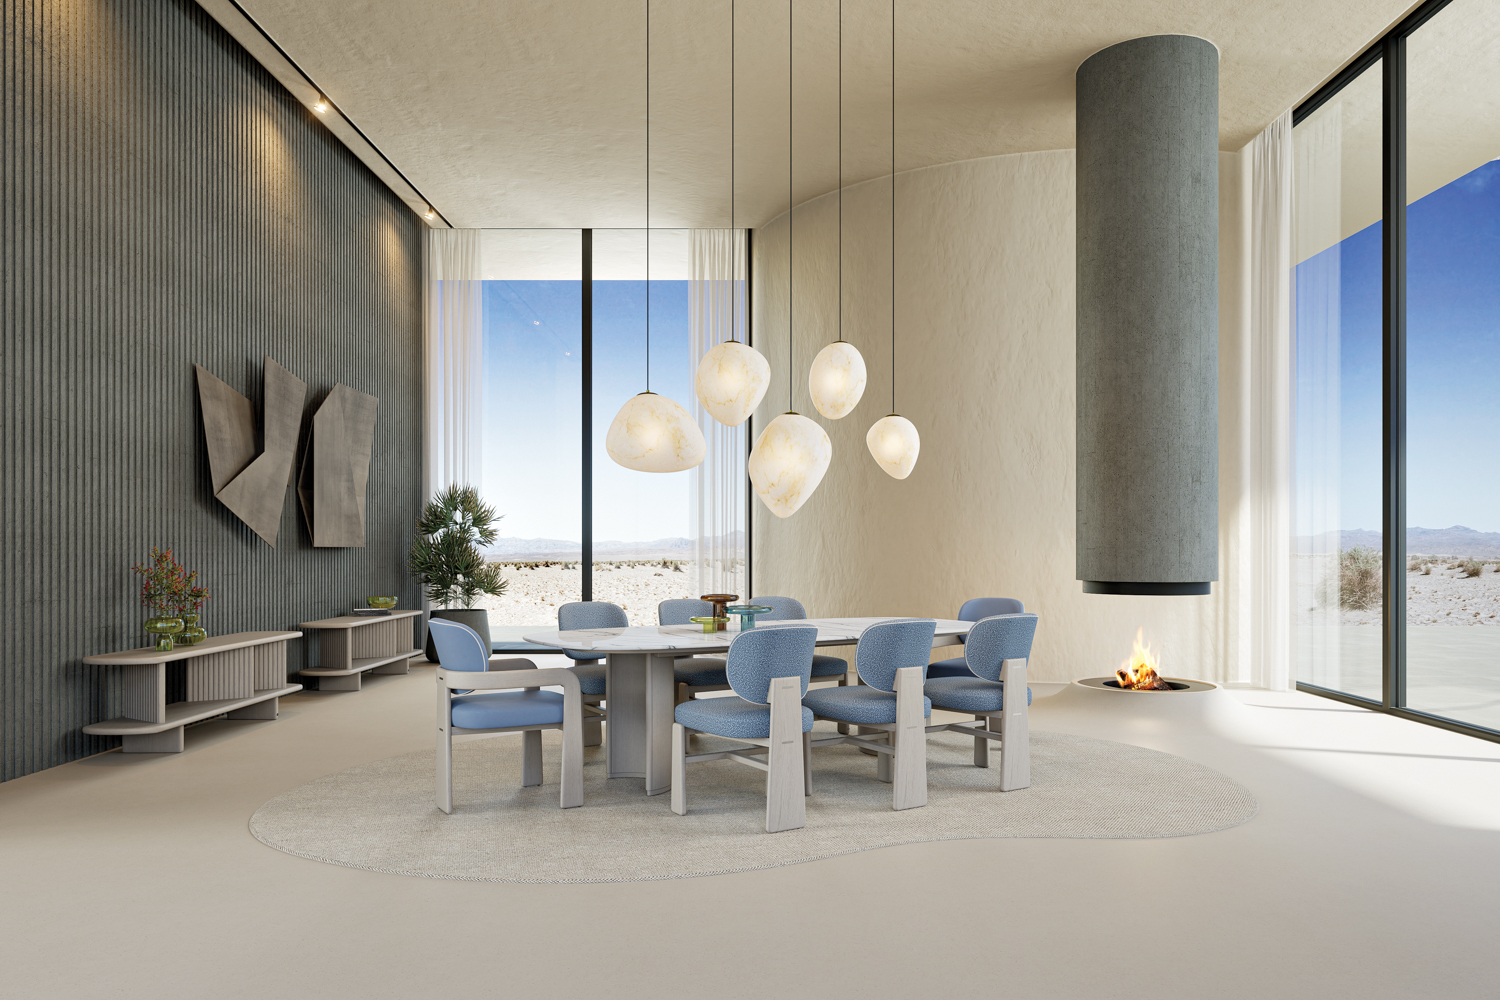 Adriana Hoyos furniture collection including oblong dining table, blue chairs and low-hanging sculptural pendants